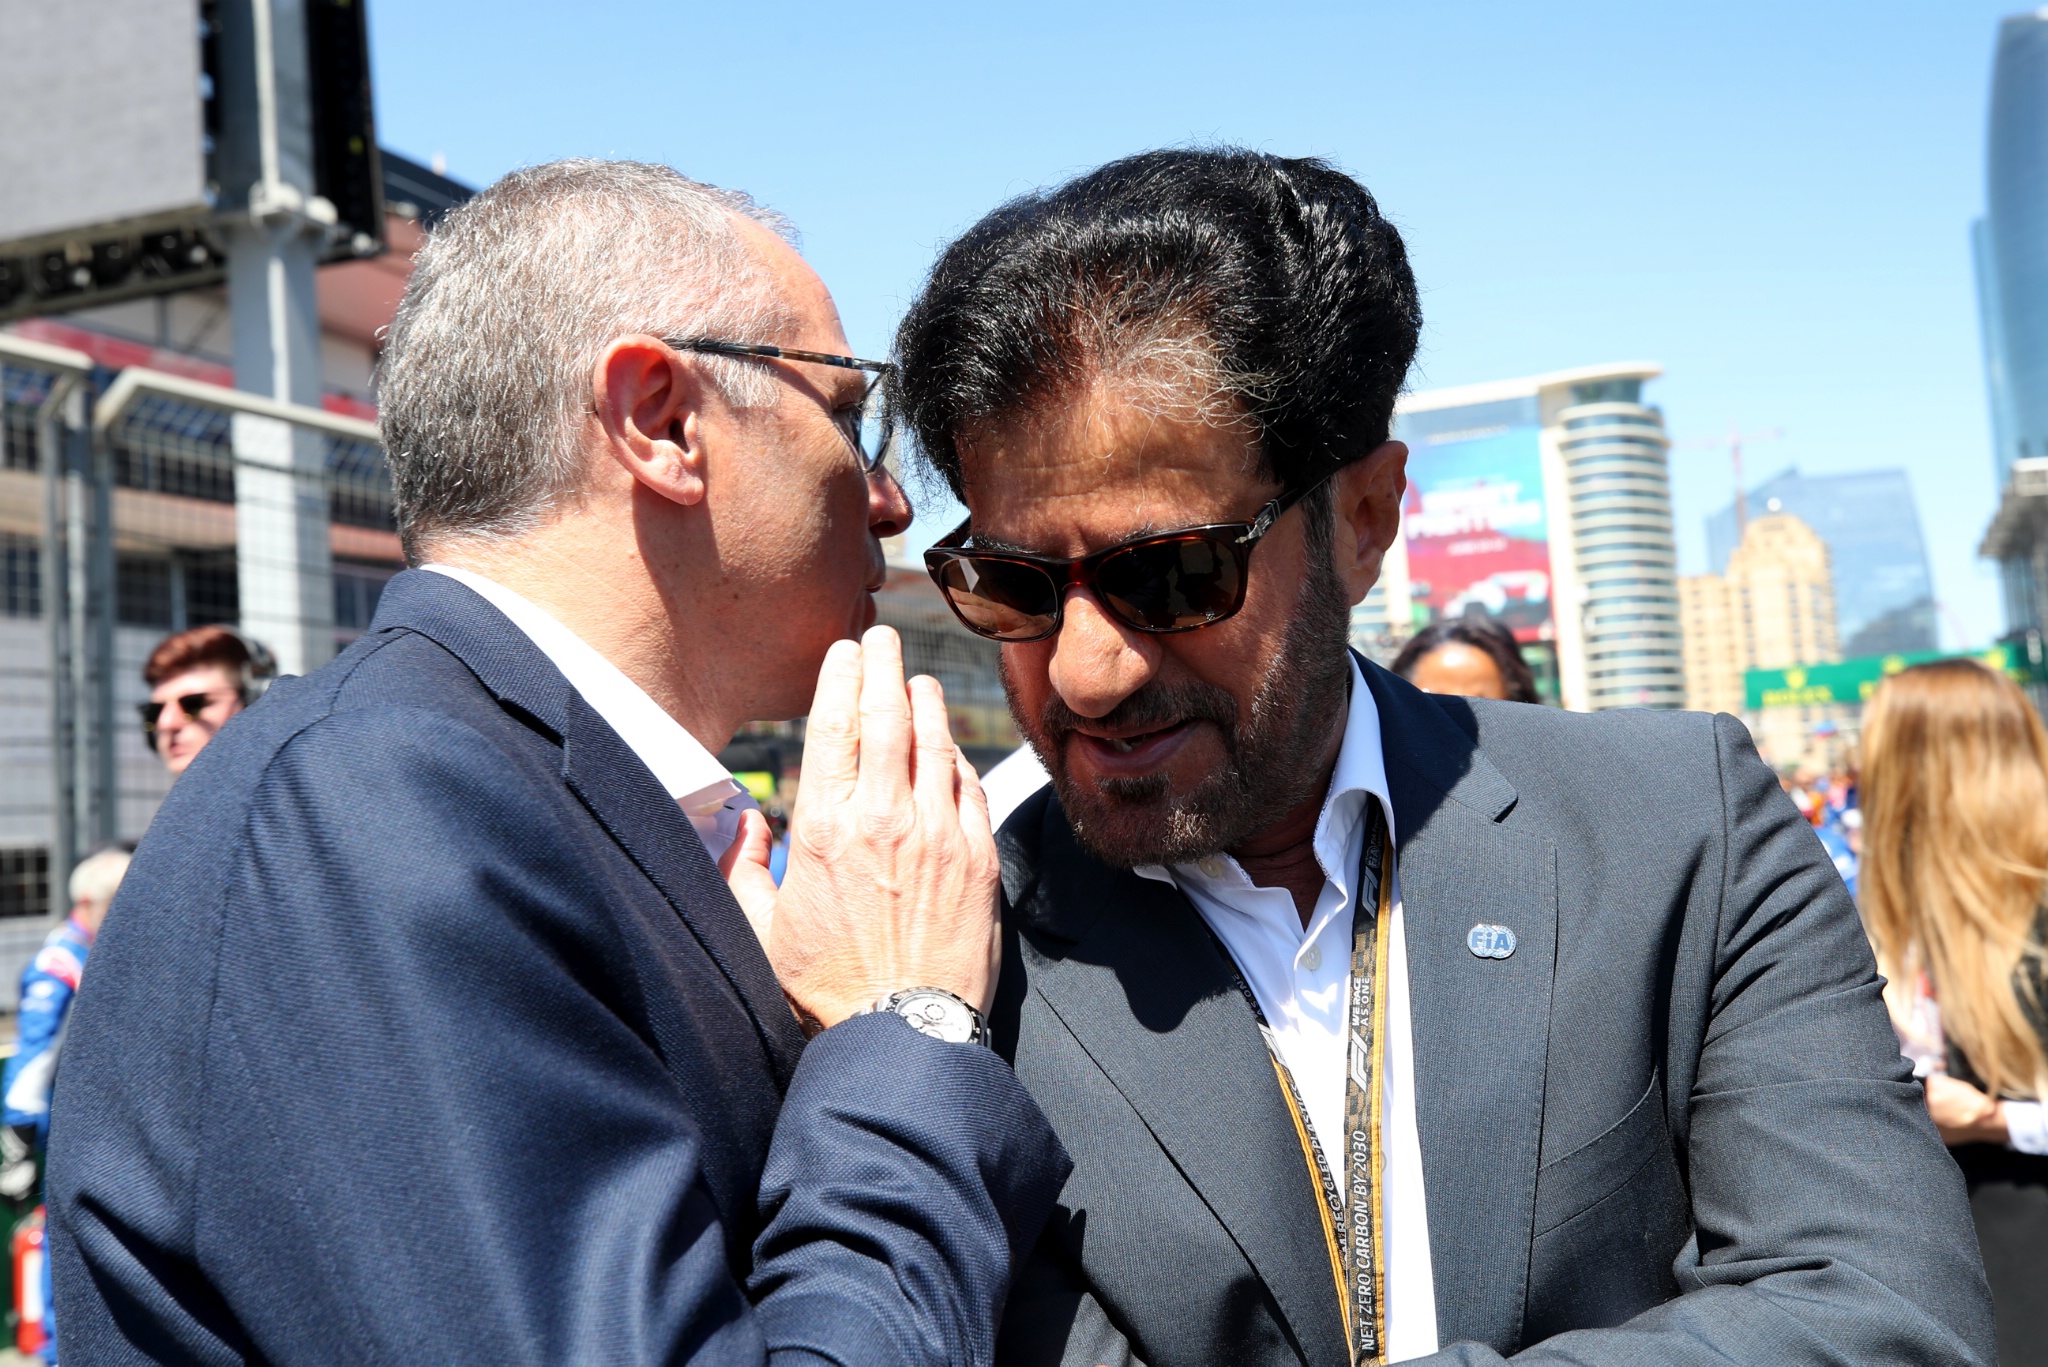 (L to R): Stefano Domenicali (ITA) Formula One President and CEO with Mohammed Bin Sulayem (UAE) FIA President. Formula 1